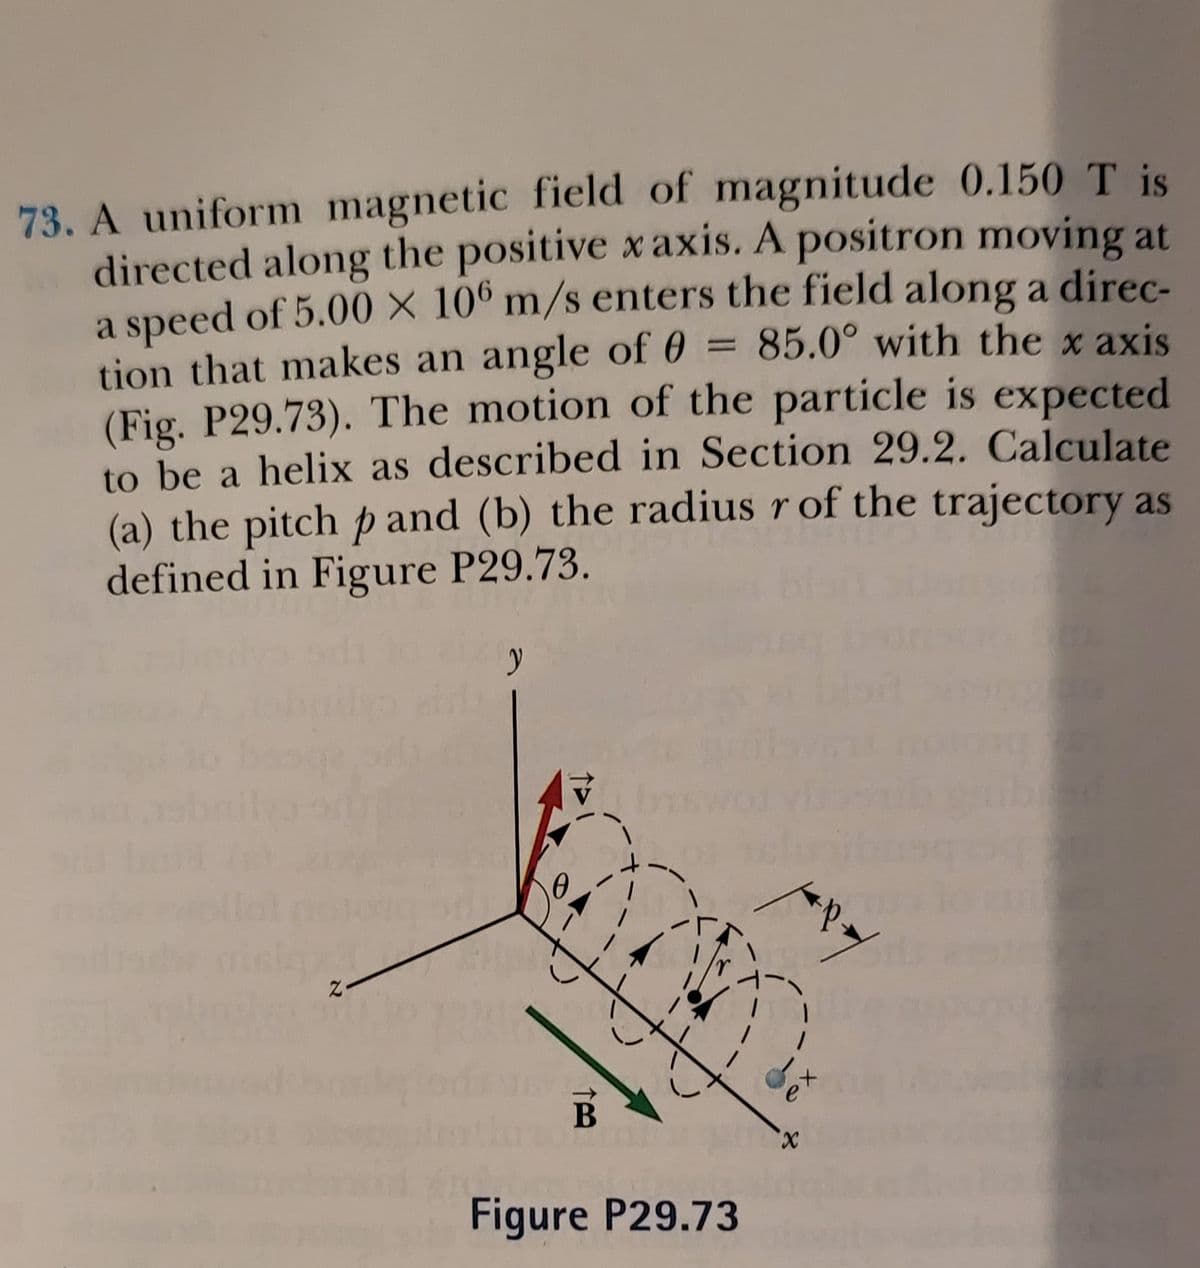 73. A uniform magnetic field of magnitude 0.150 T is
directed along the positive x axis. A positron moving at
a speed of 5.00 × 10º m/s enters the field along a direc-
tion that makes an angle of 0 = 85.0° with the x axis
(Fig. P29.73). The motion of the particle is expected
to be a helix as described in Section 29.2. Calculate
(a) the pitch p and (b) the radius r of the trajectory as
defined in Figure P29.73.
e'
В
X.
Figure P29.73
